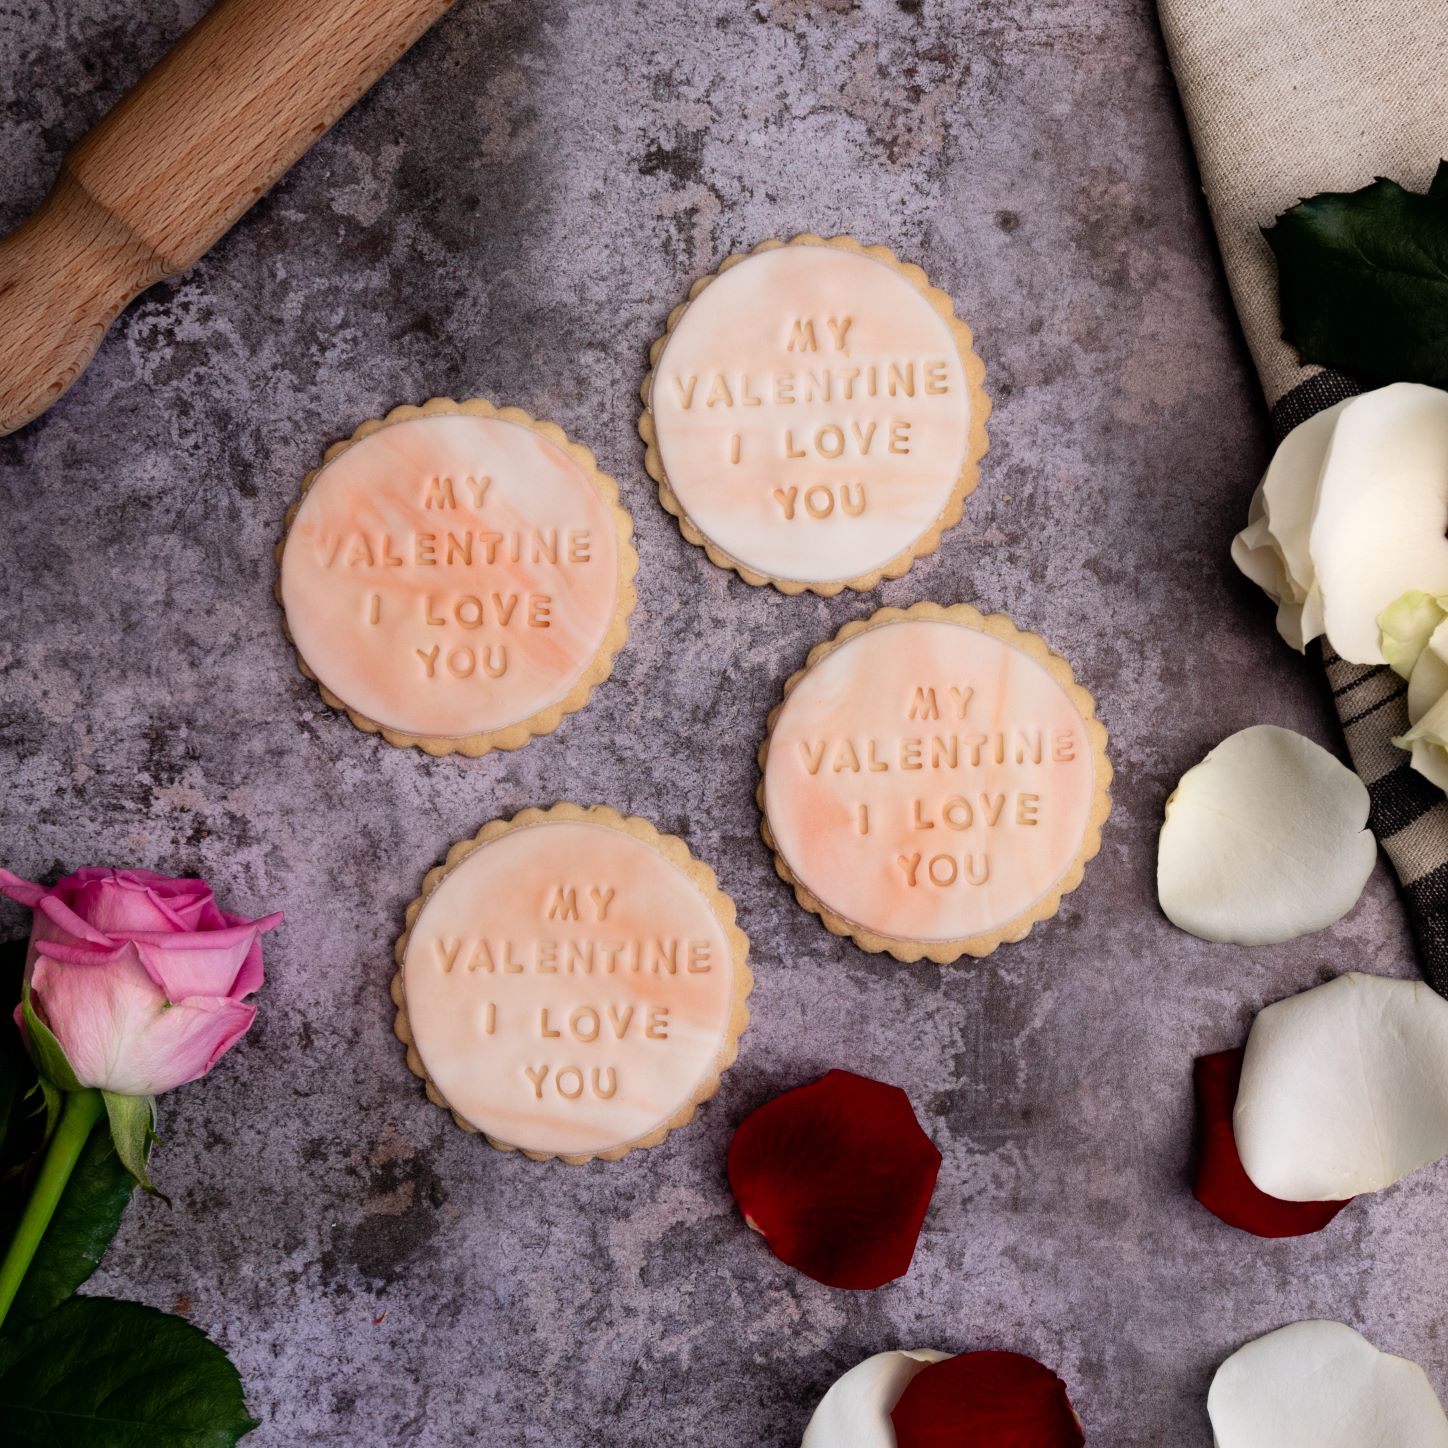 My Valentine I love you iced biscuits by Bloom Bakers